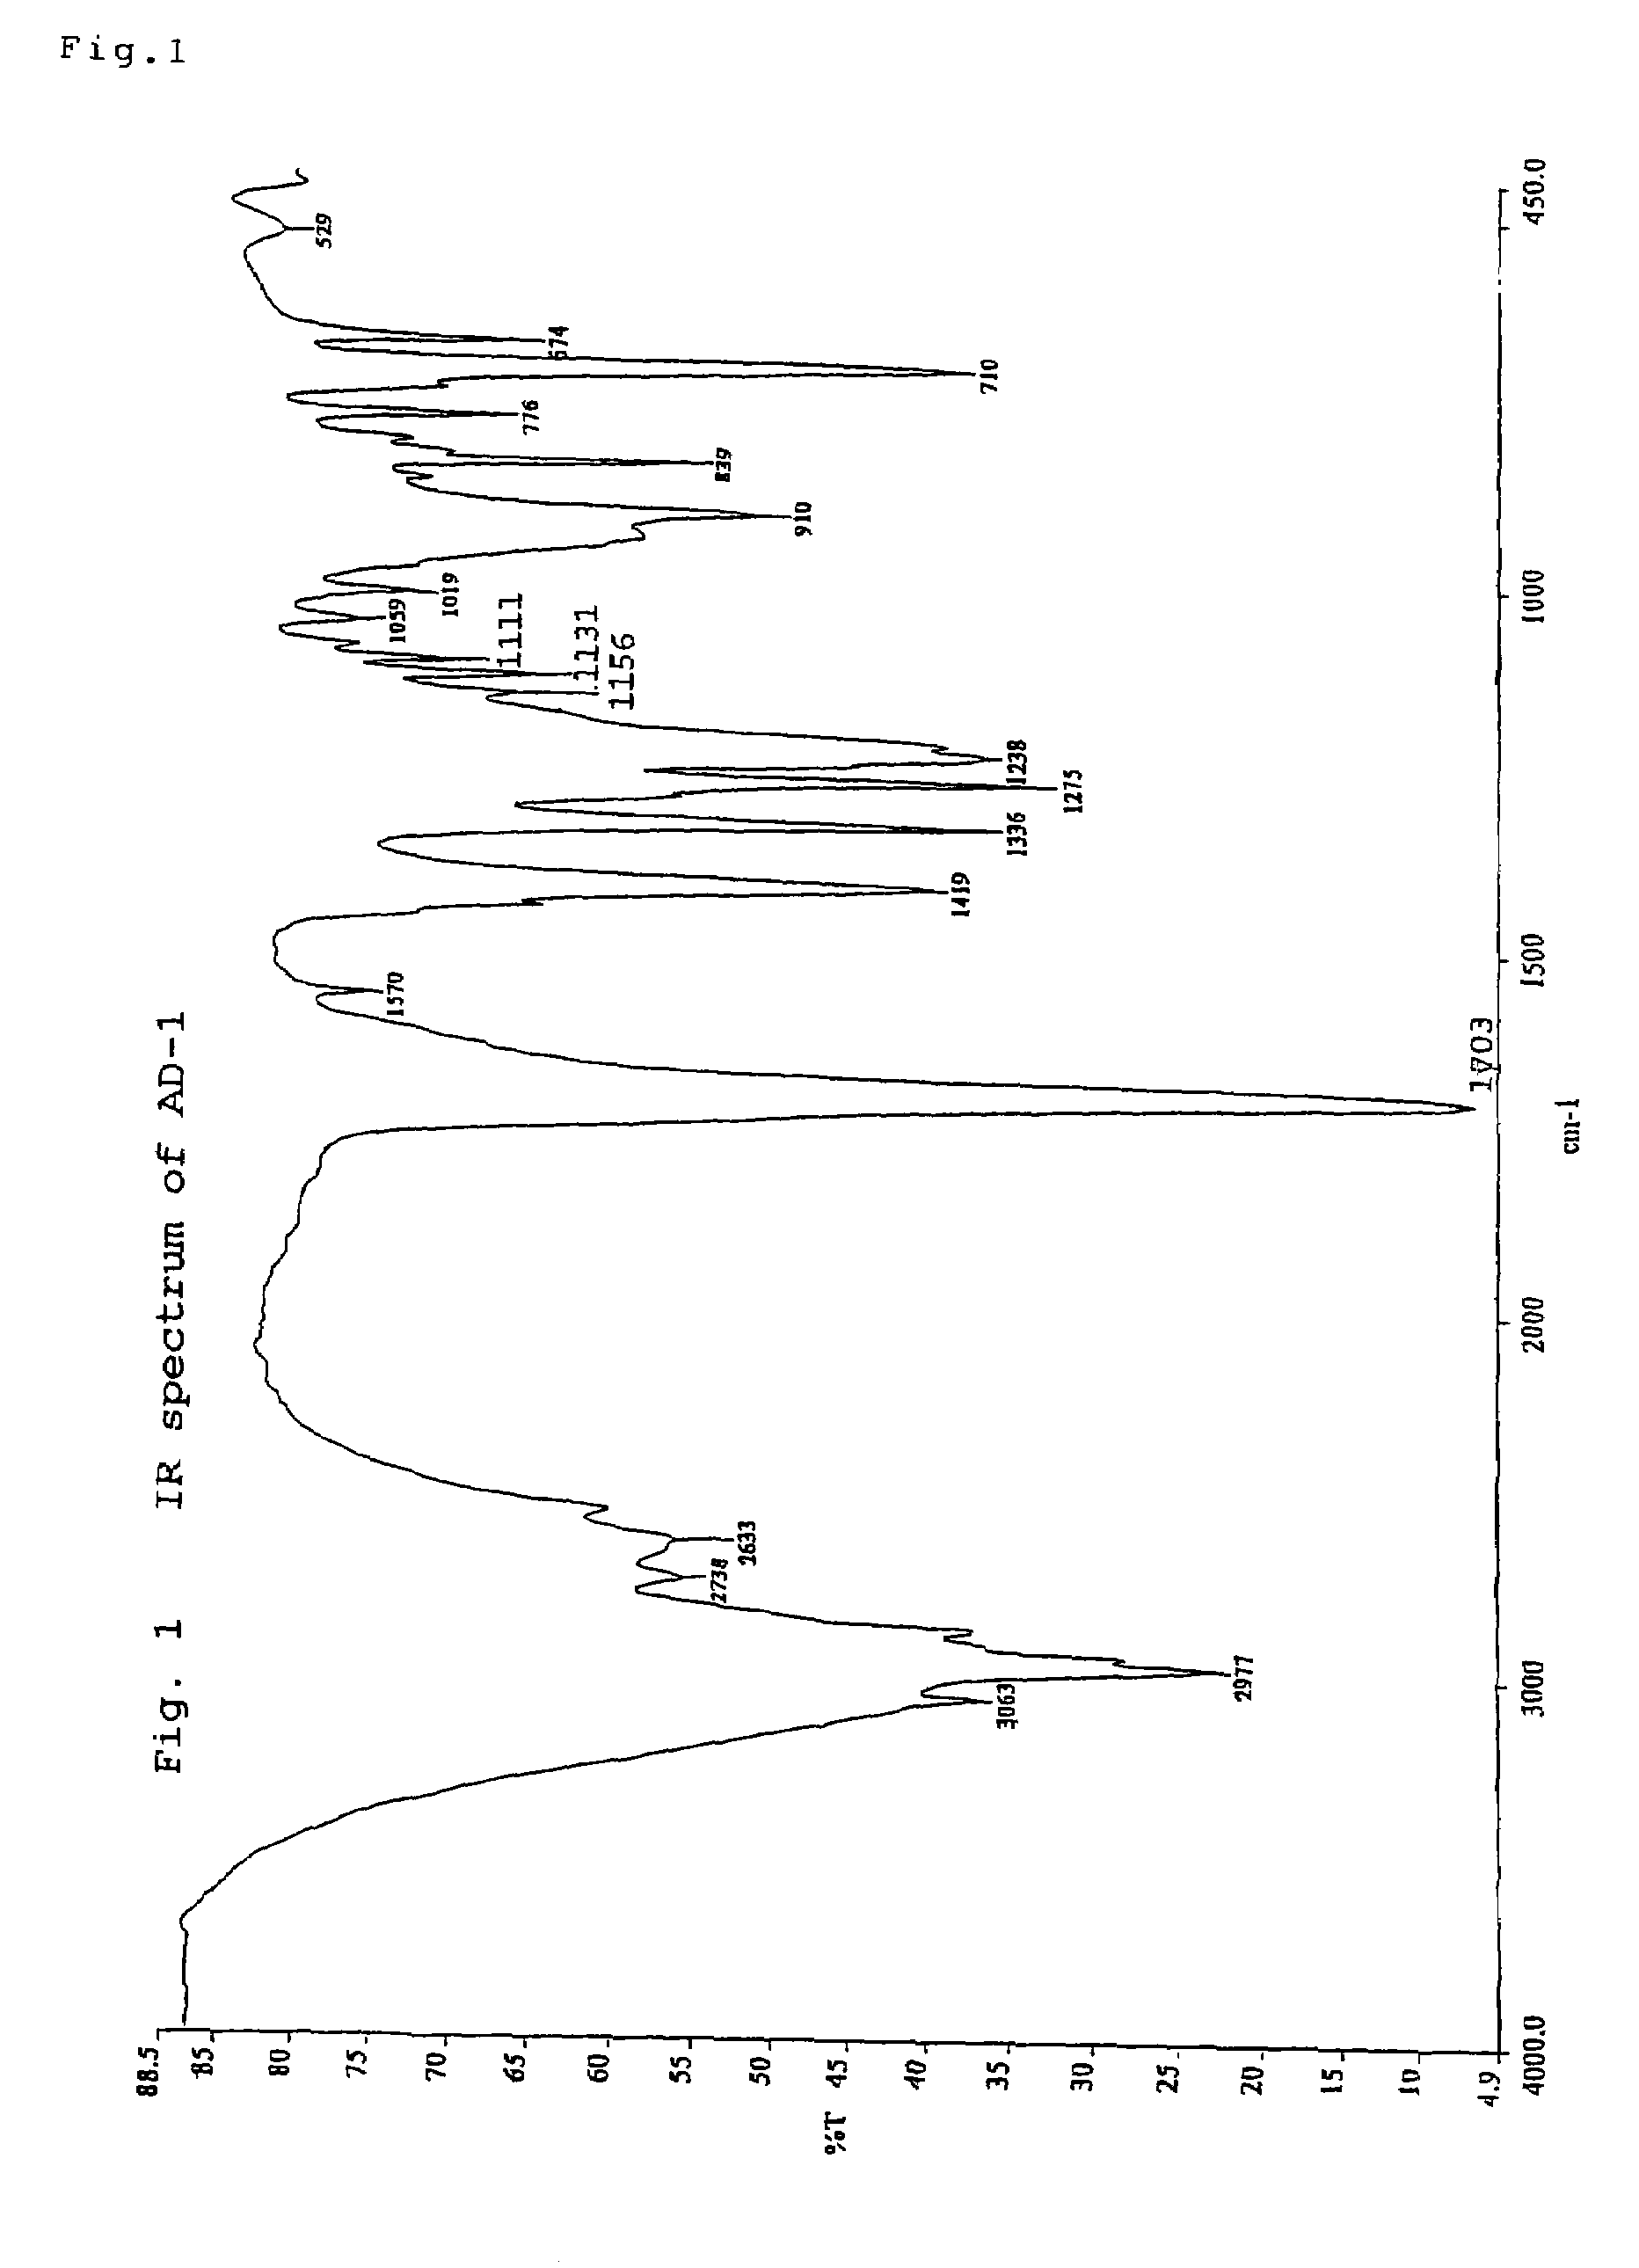 Cyclic carboxylic acid compound and use thereof